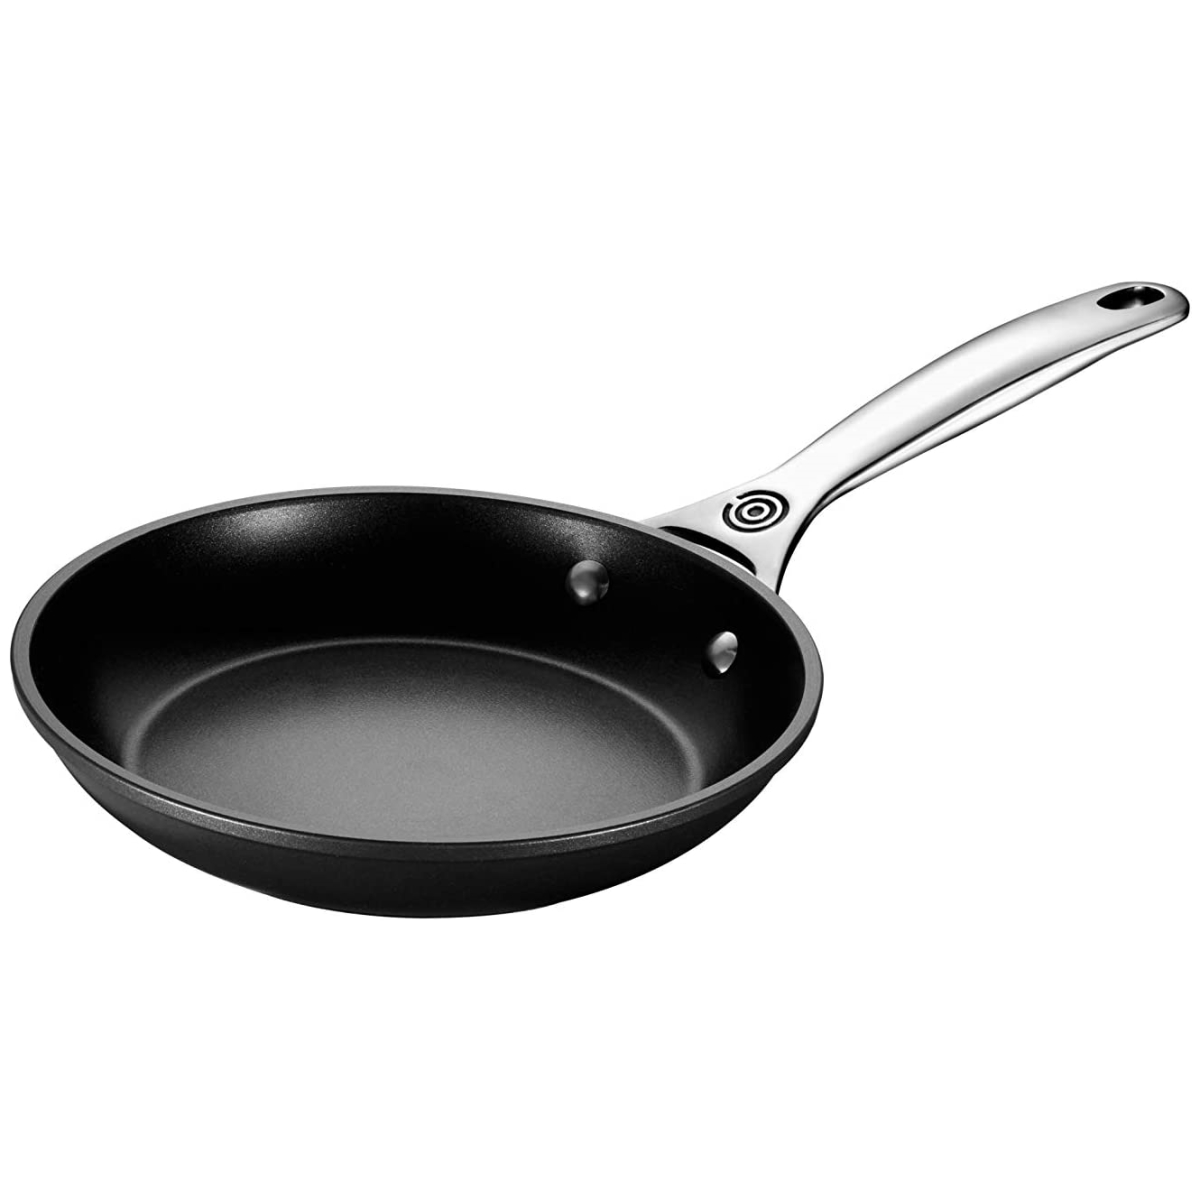 Carbon Steel- The Pro's All-Purpose, Nonstick Cookware of Choice